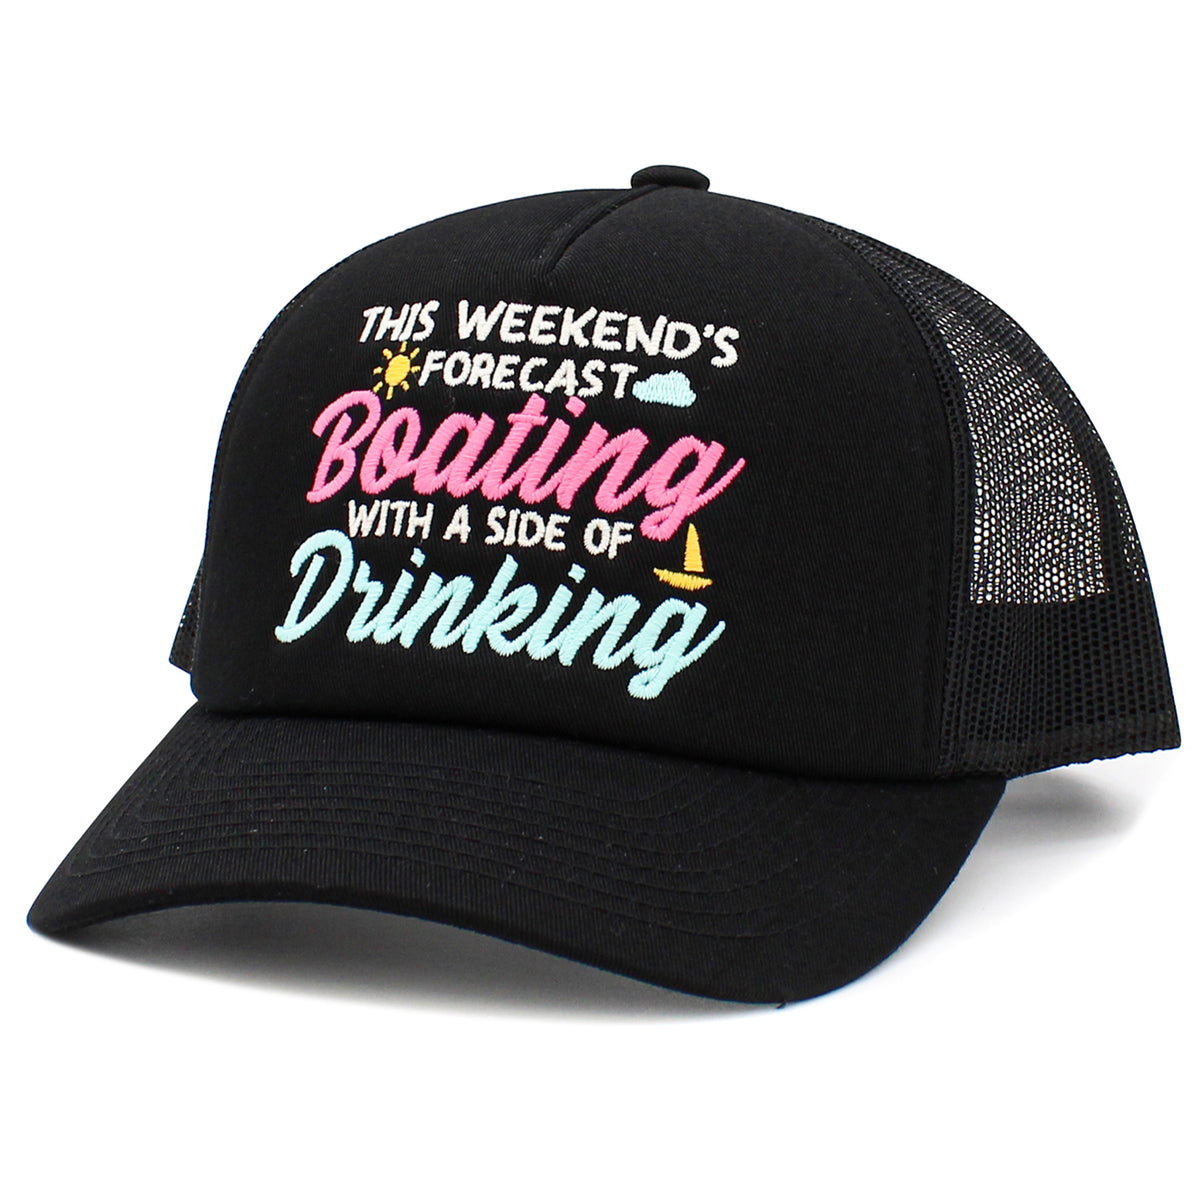 1520 - This Weekend's Forecast Boating with a Side of Drinking Hat - Black